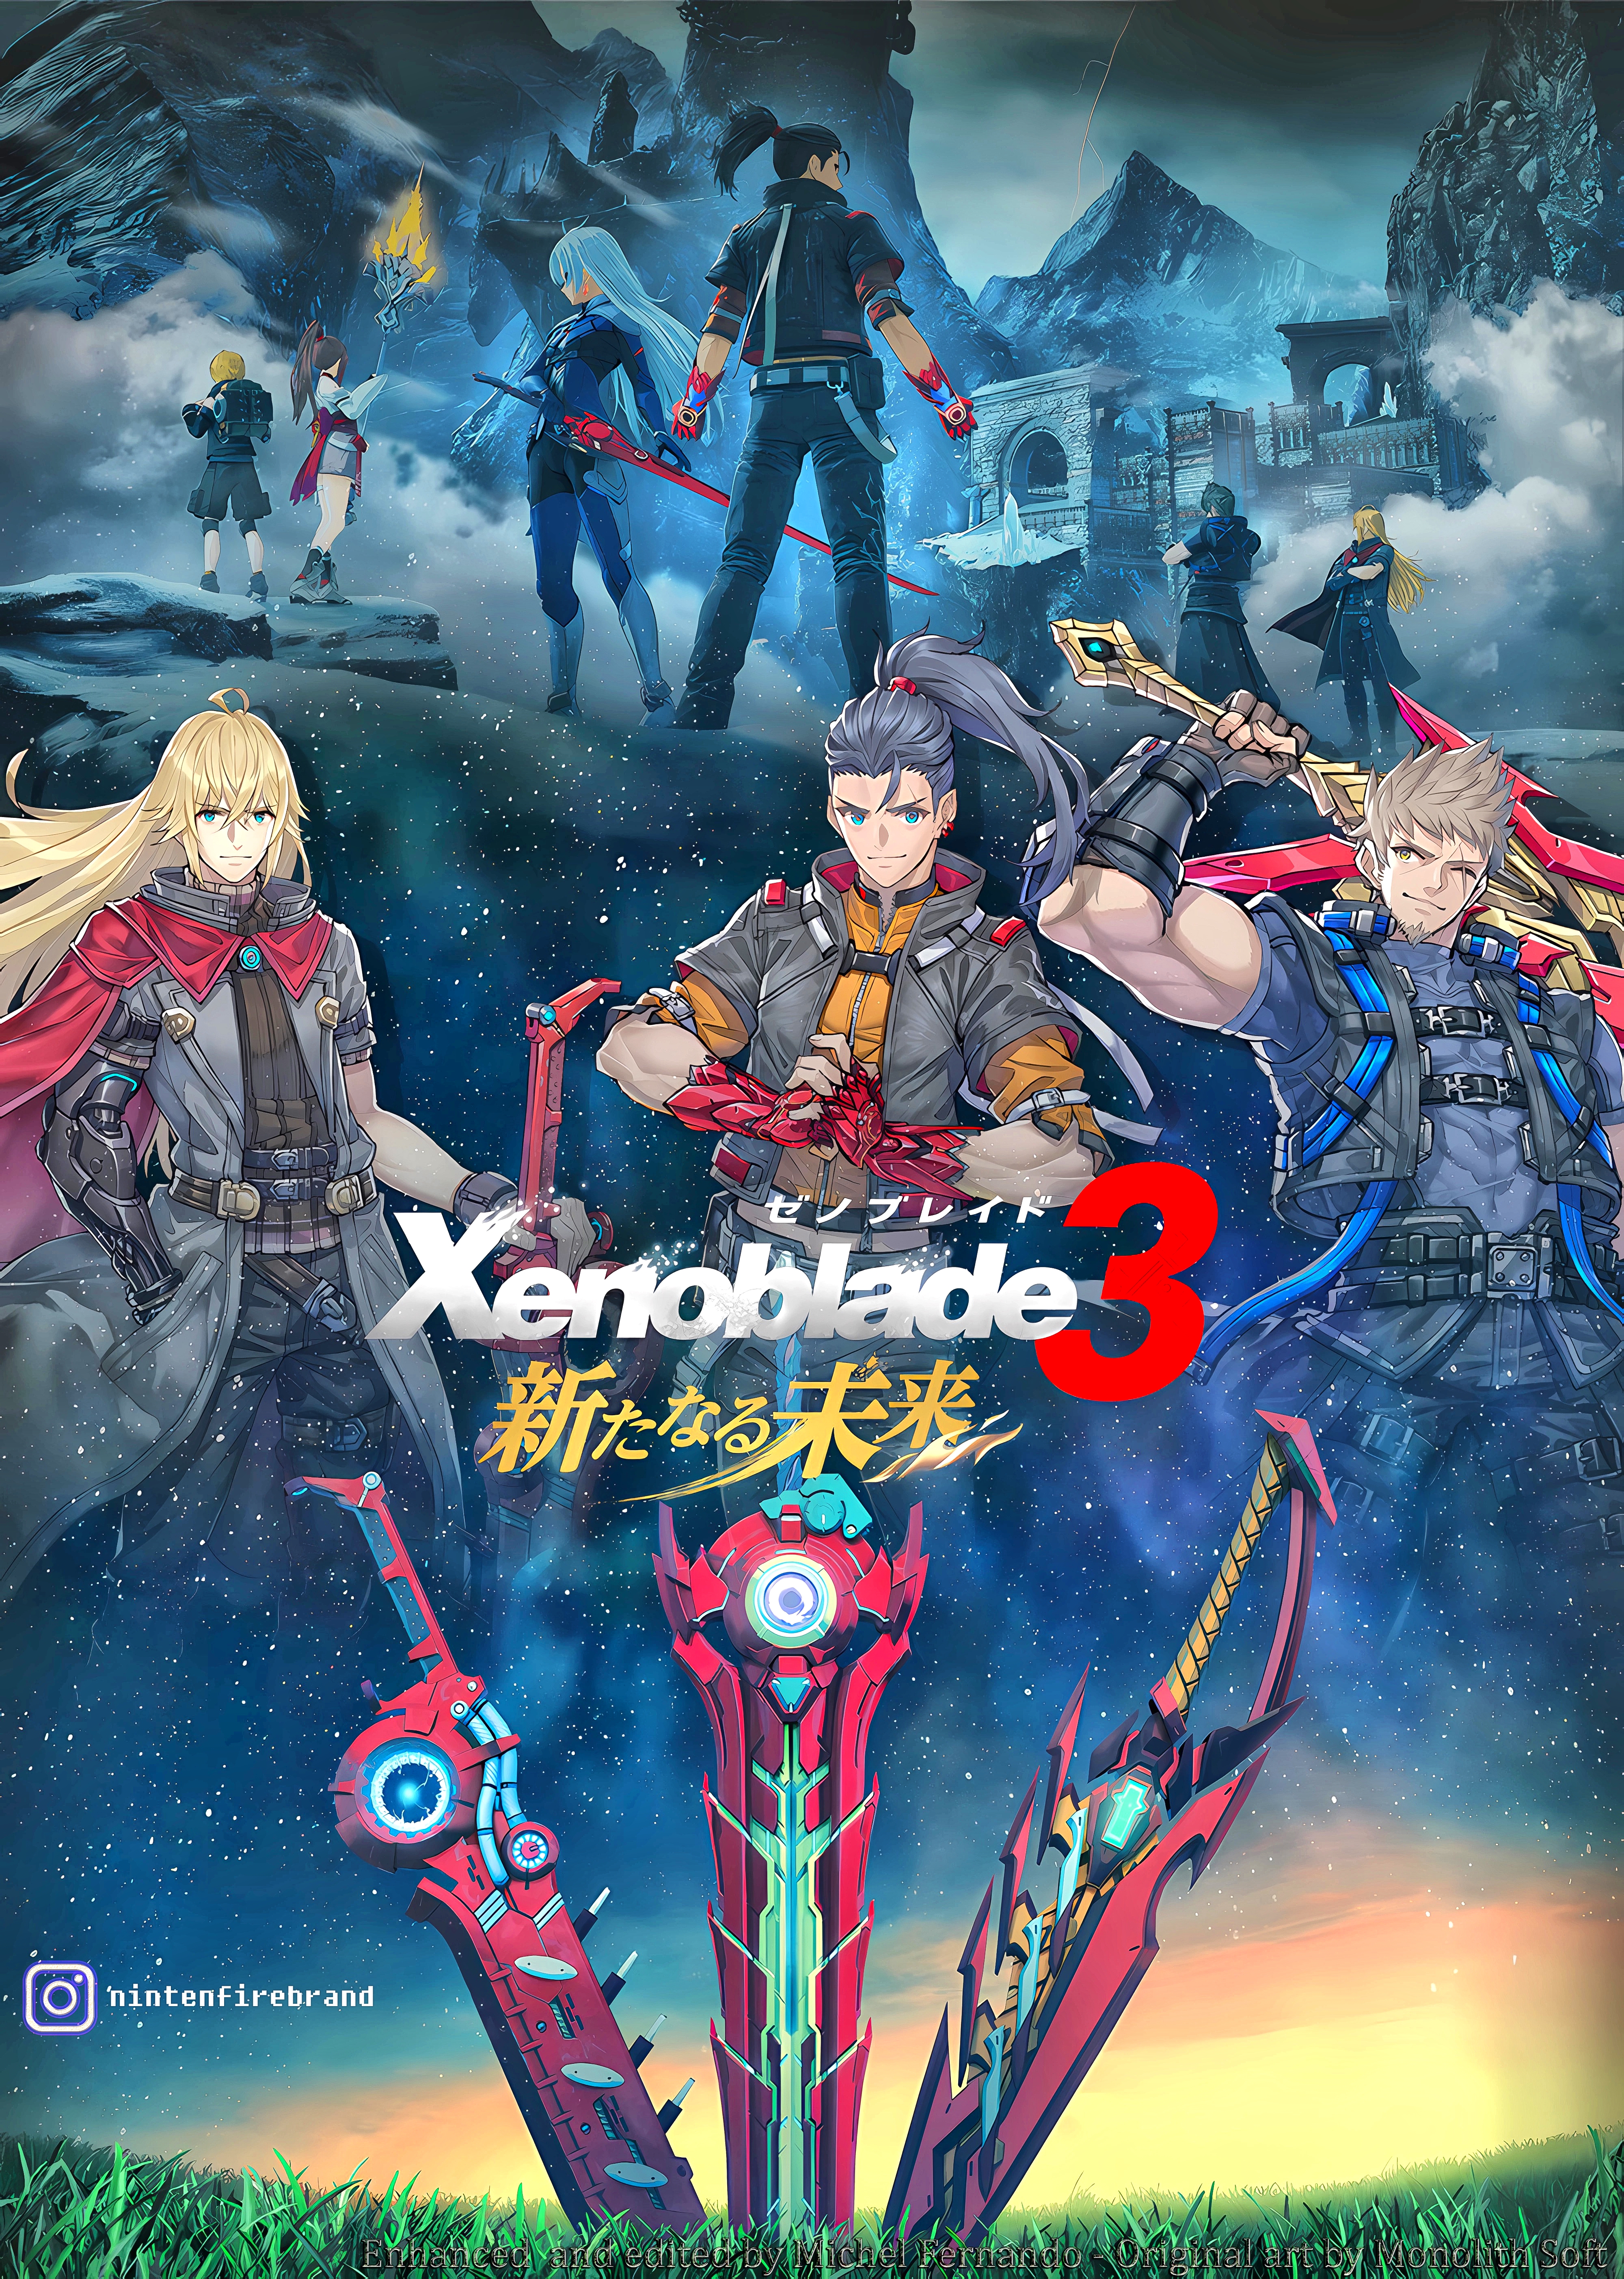 How the Enemypaedia works in Xenoblade Chronicles 3 Future Redeemed